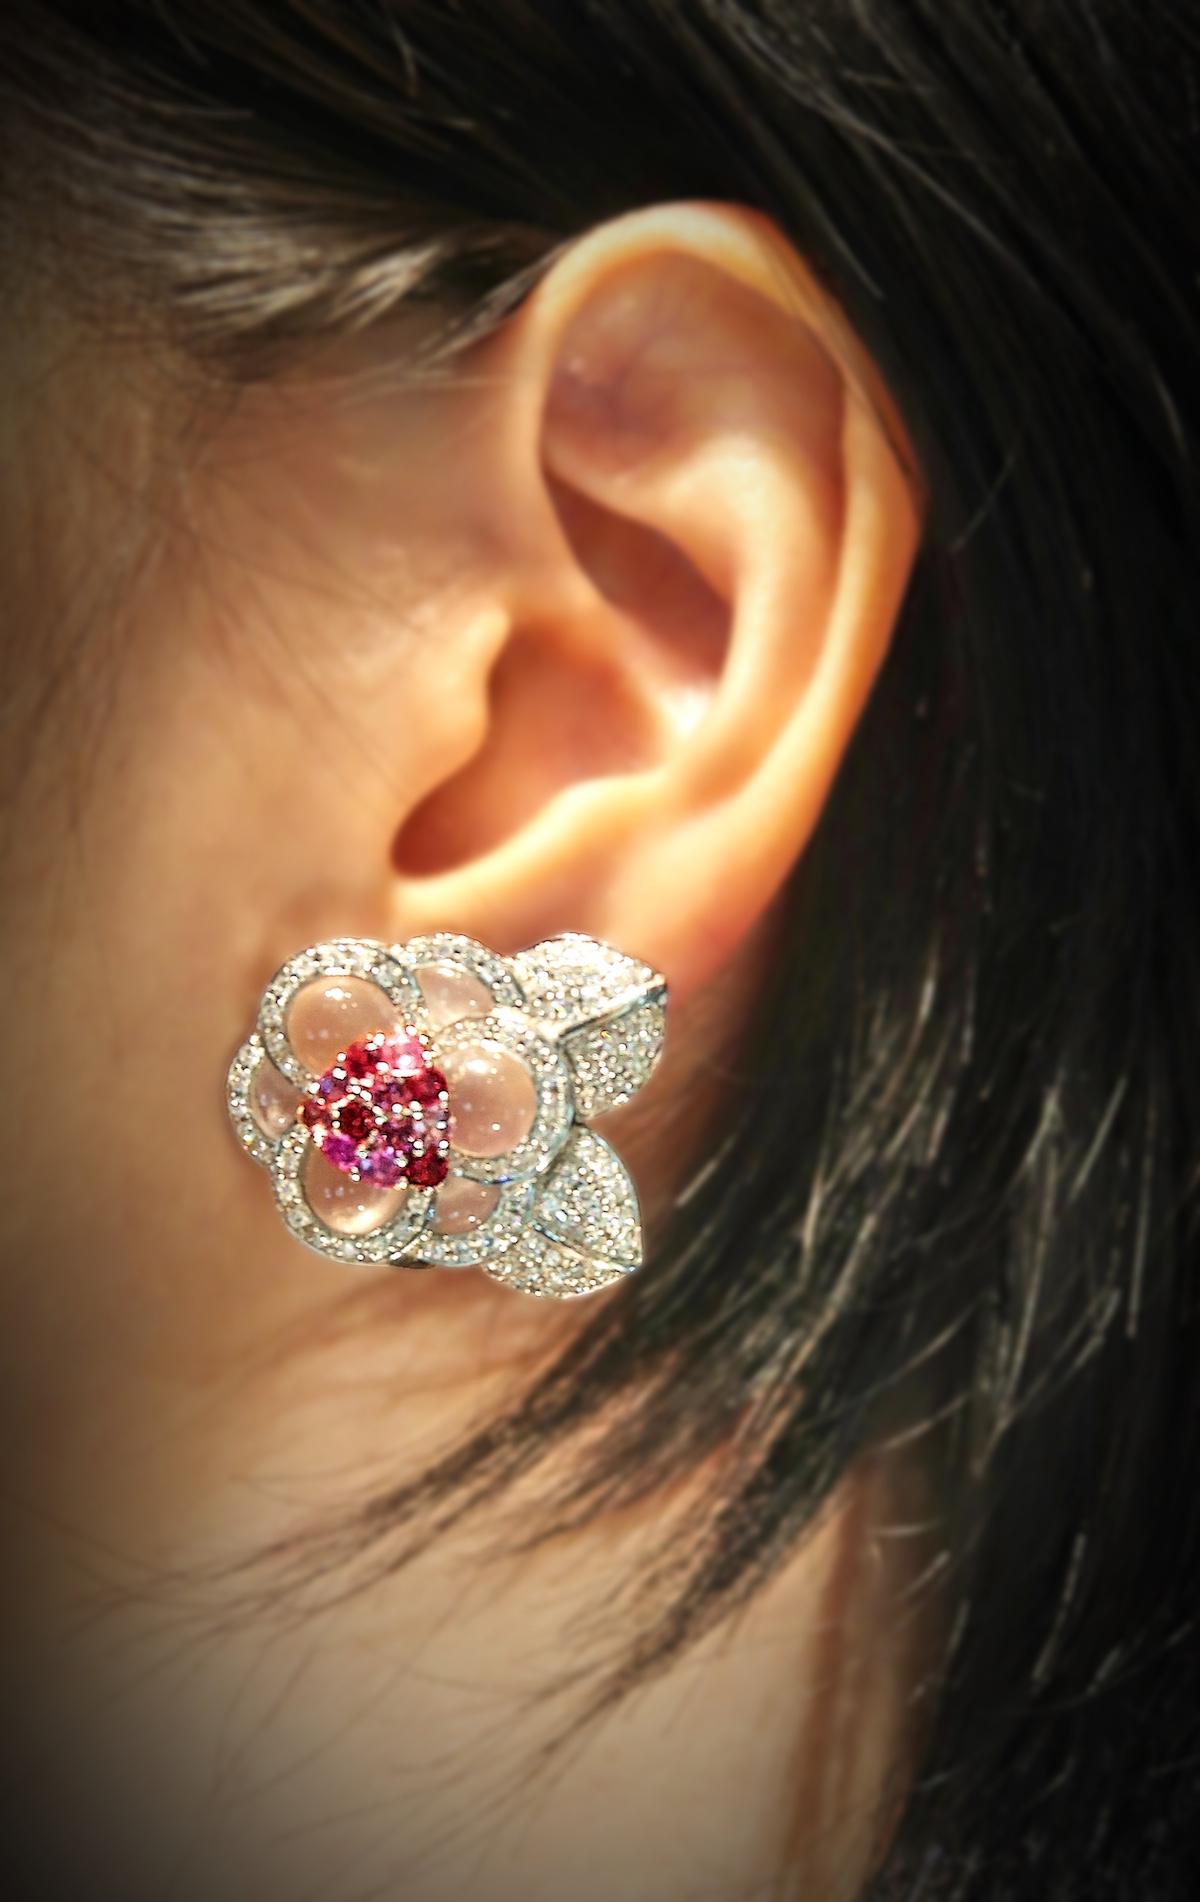 Flower Clip-on Earrings with Collapsible Posts in 18K White Gold embellished with Diamonds and Pink Stones in multiple shades, Cabochon Rose Quartz, Pink Sapphire and Rhodolite.

Suitable for Pierced / Non-Pierced Ears

Diamond: Round Brilliant,